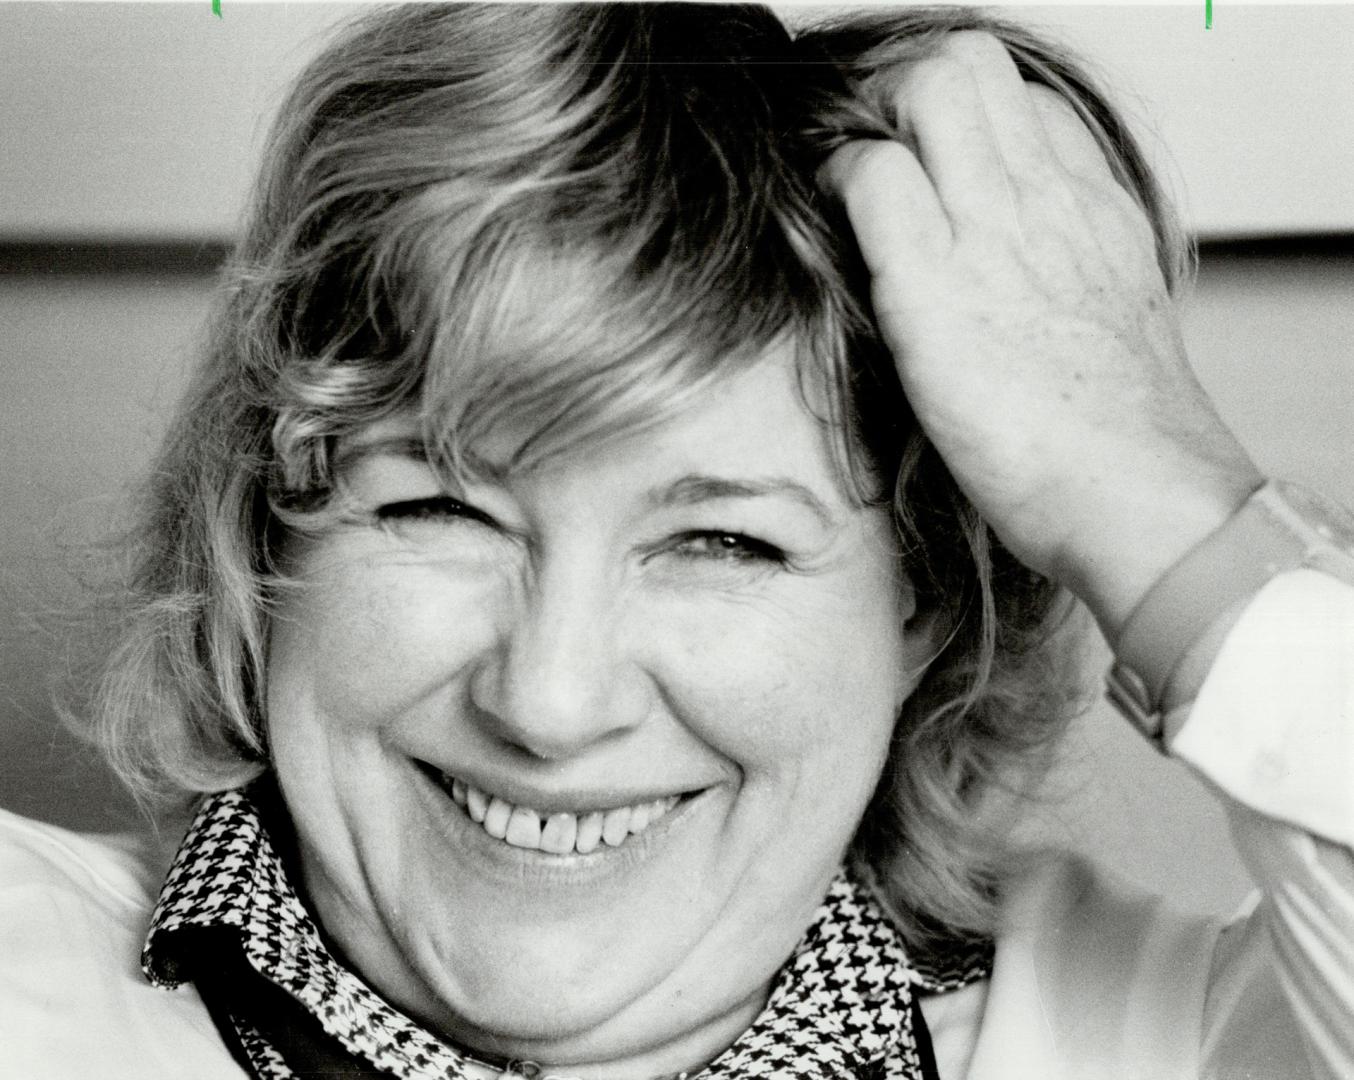 Fay Weldon: One of Britain's most innovative novelists, noted for her consistent qualities: humor, originality and perceptiveness